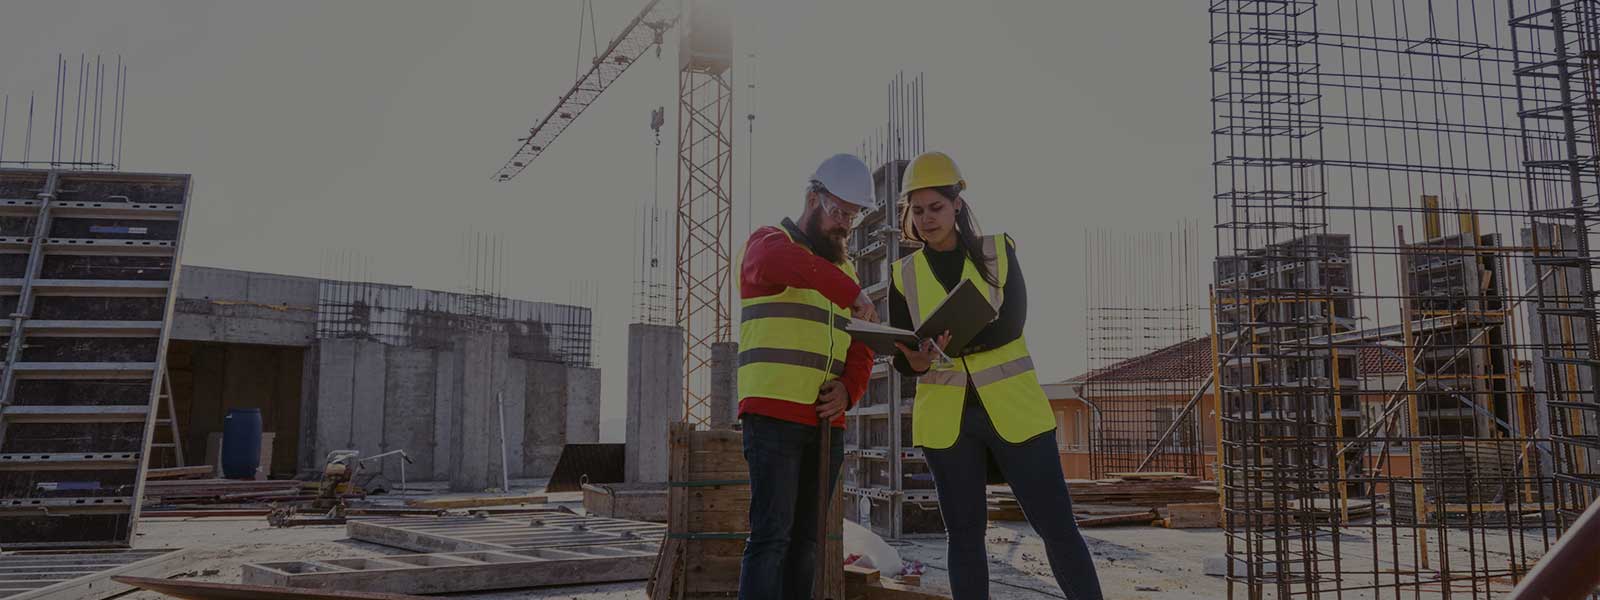 Man and woman in hard hats and high vis vests on a construction site looking at a laptop